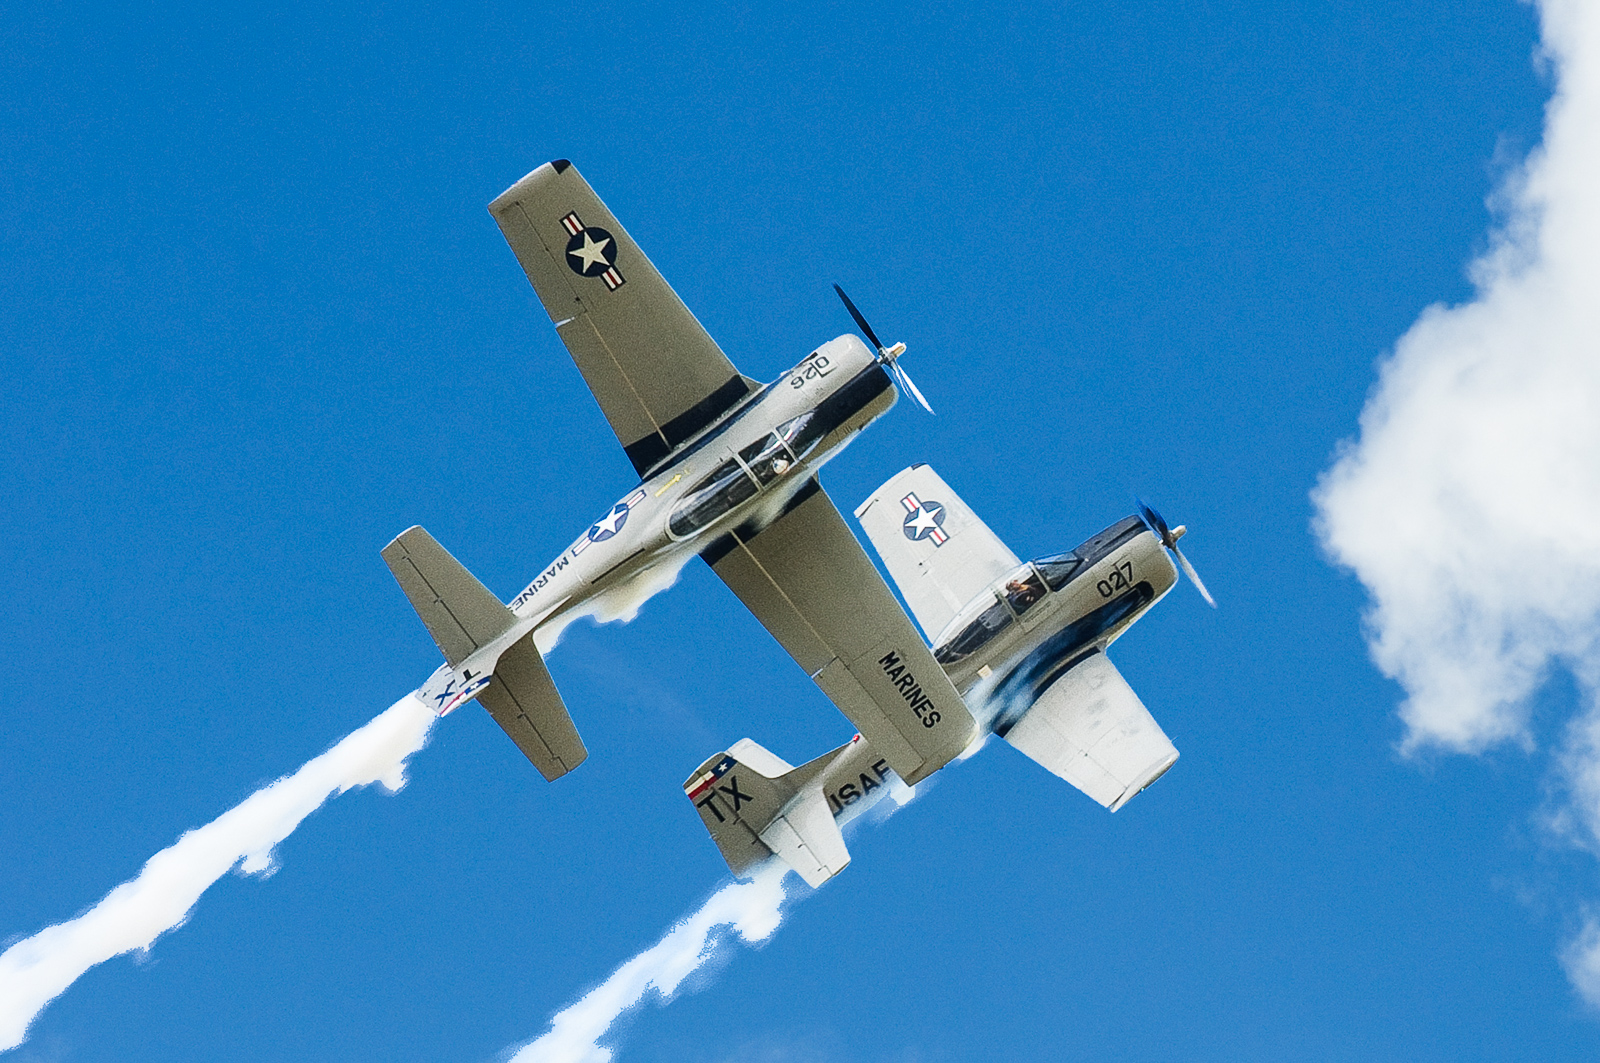 The two T-28Bs of the Trojan Phlyers perform close-in formation aerobatics, as is amply demonstrated here. (photo via Trojan Phlyers)